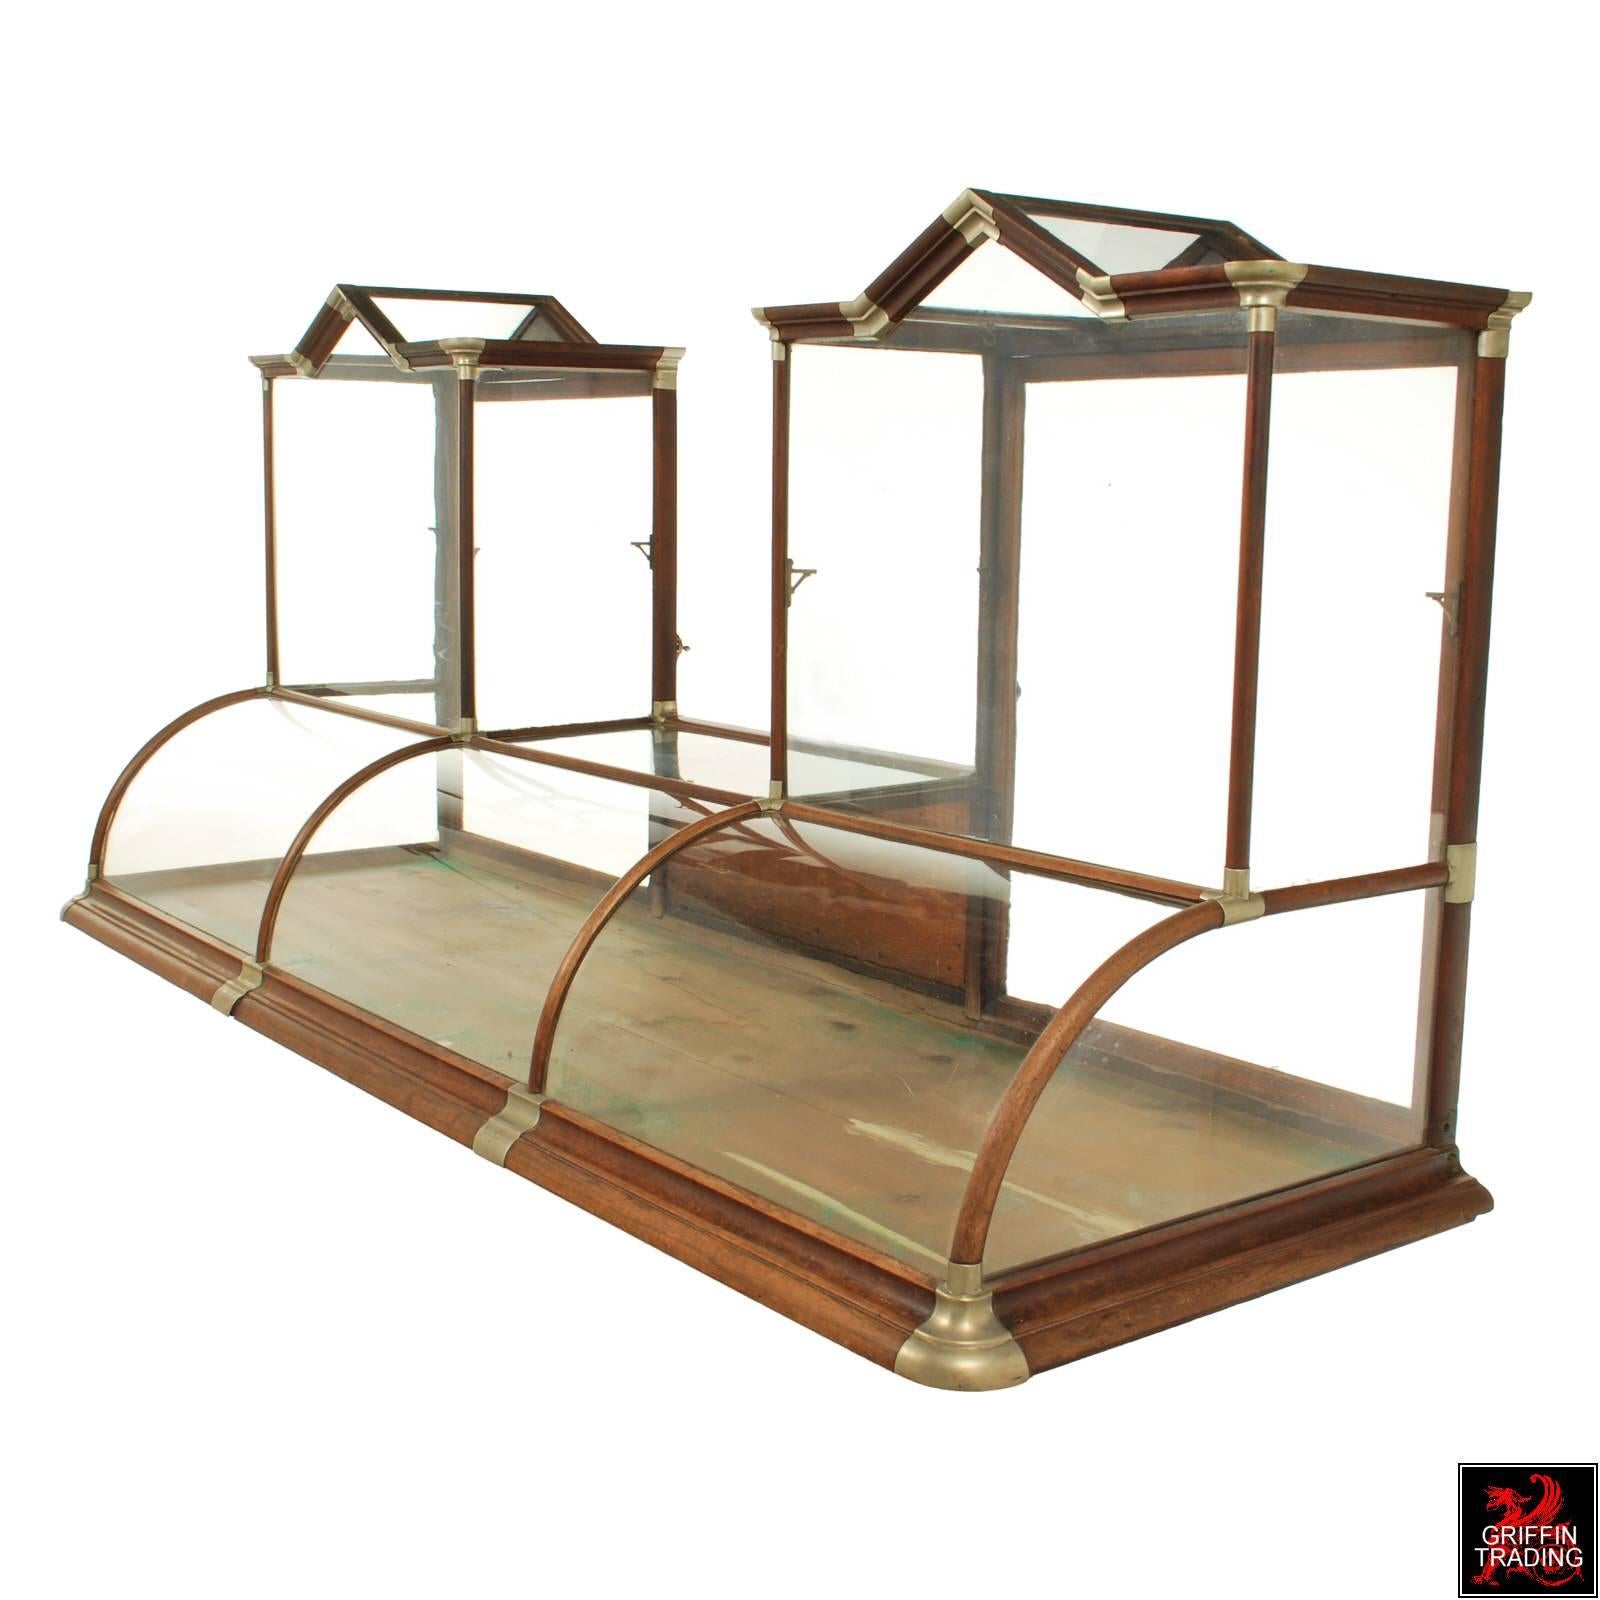 Here is a beautiful antique curved glass and oak display cabinet from the late 19th-early 20th century. This handsome store fixture is especially nice because its flanked on each end with a taller shelf area that is topped with a gable roof,